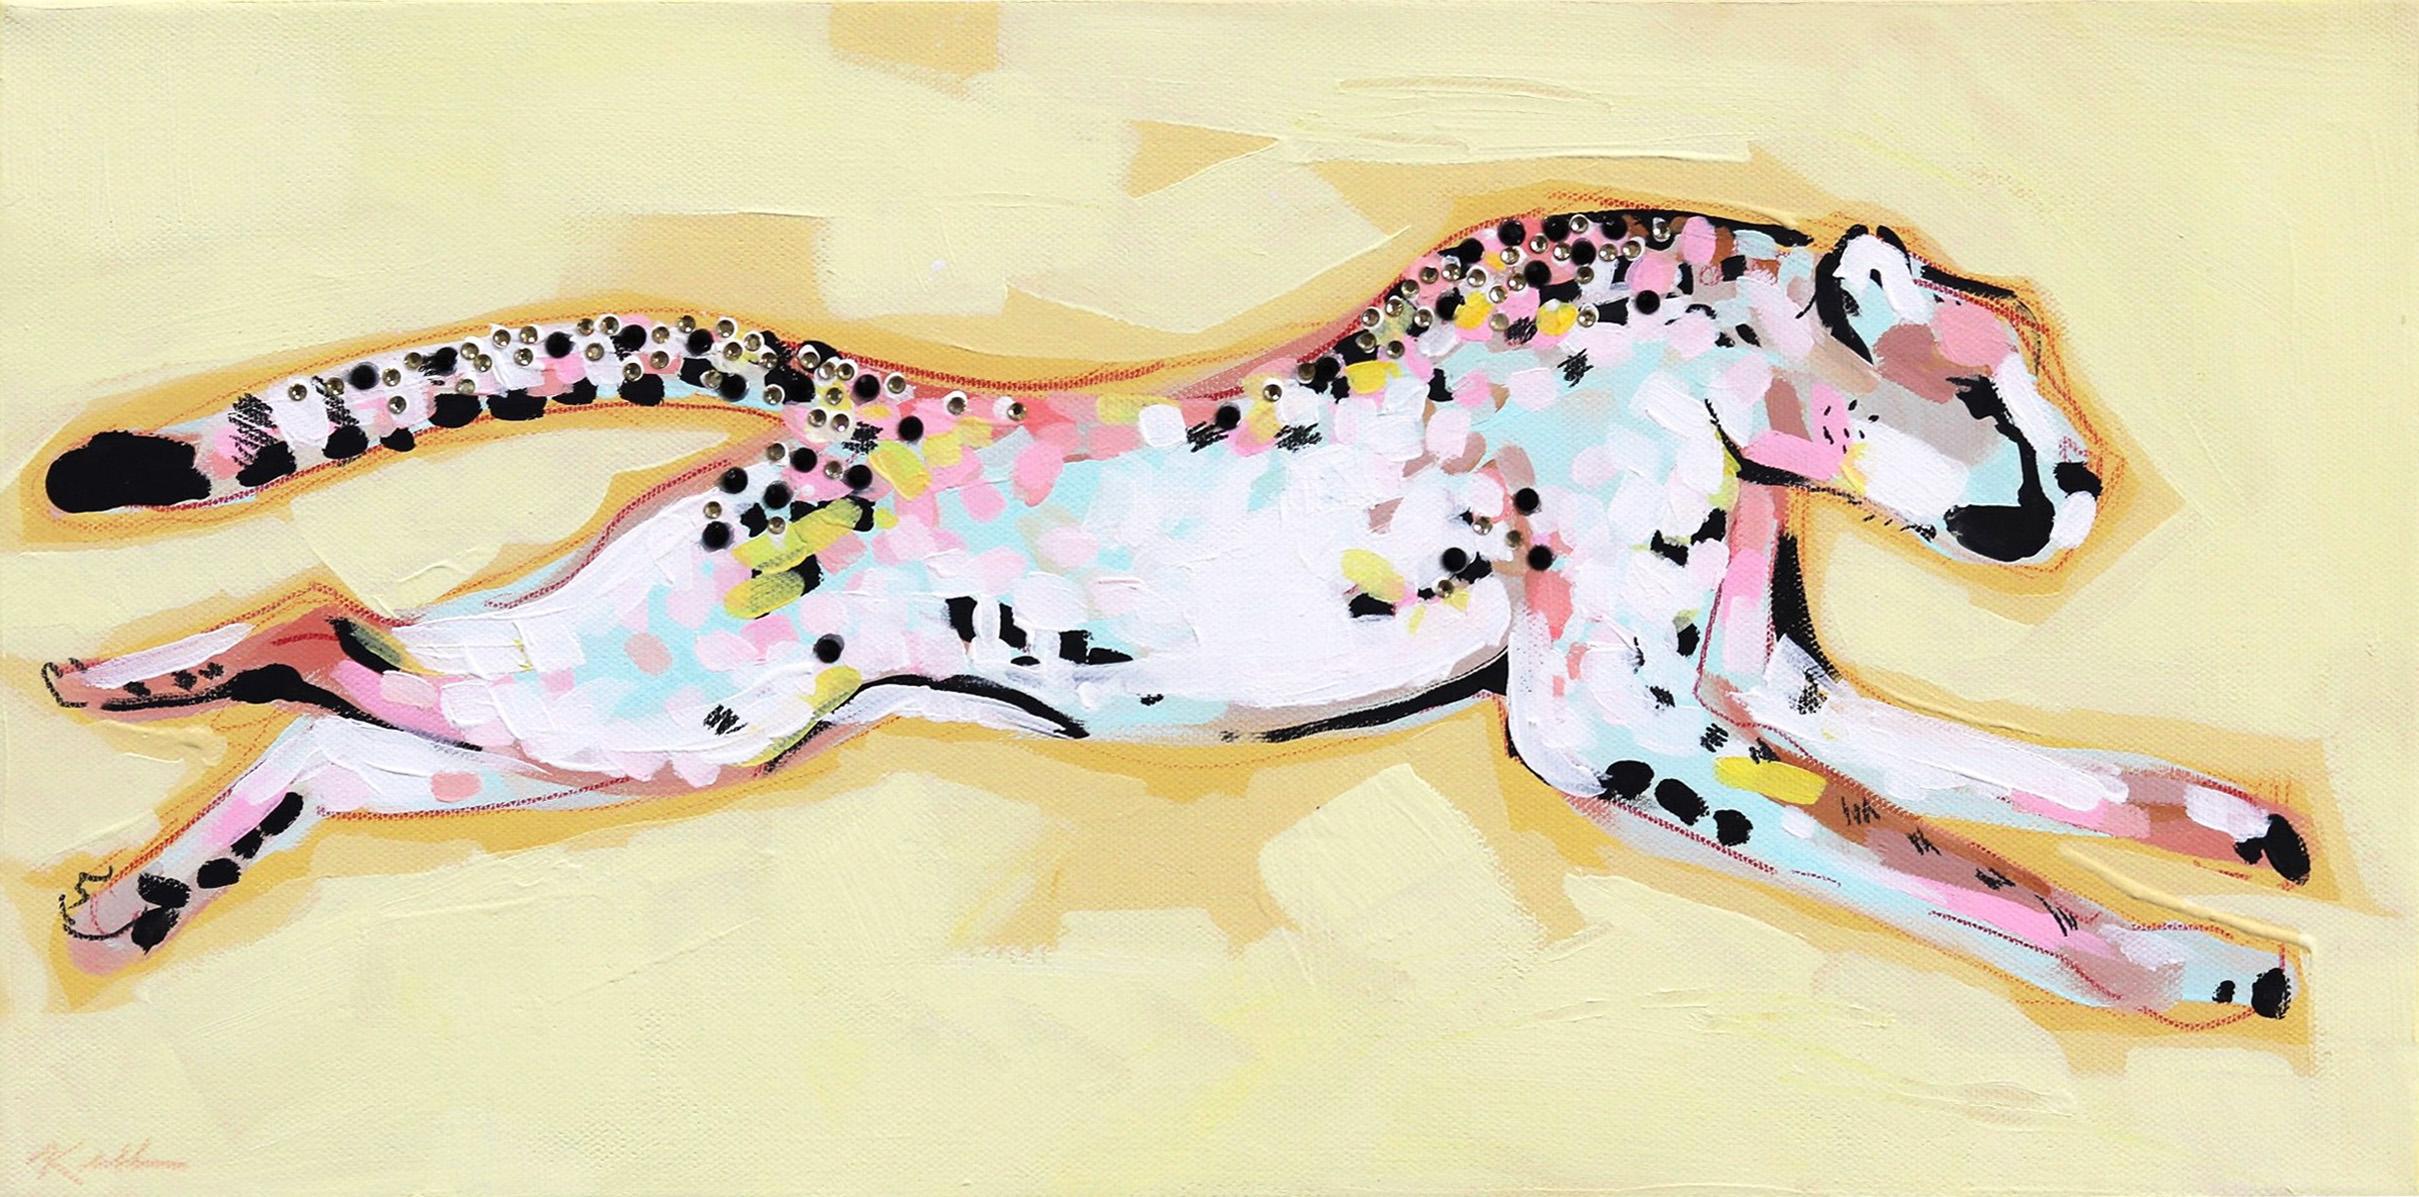 Running High - Graceful Textured Animal Painting - Abstract Figurative Cheetah